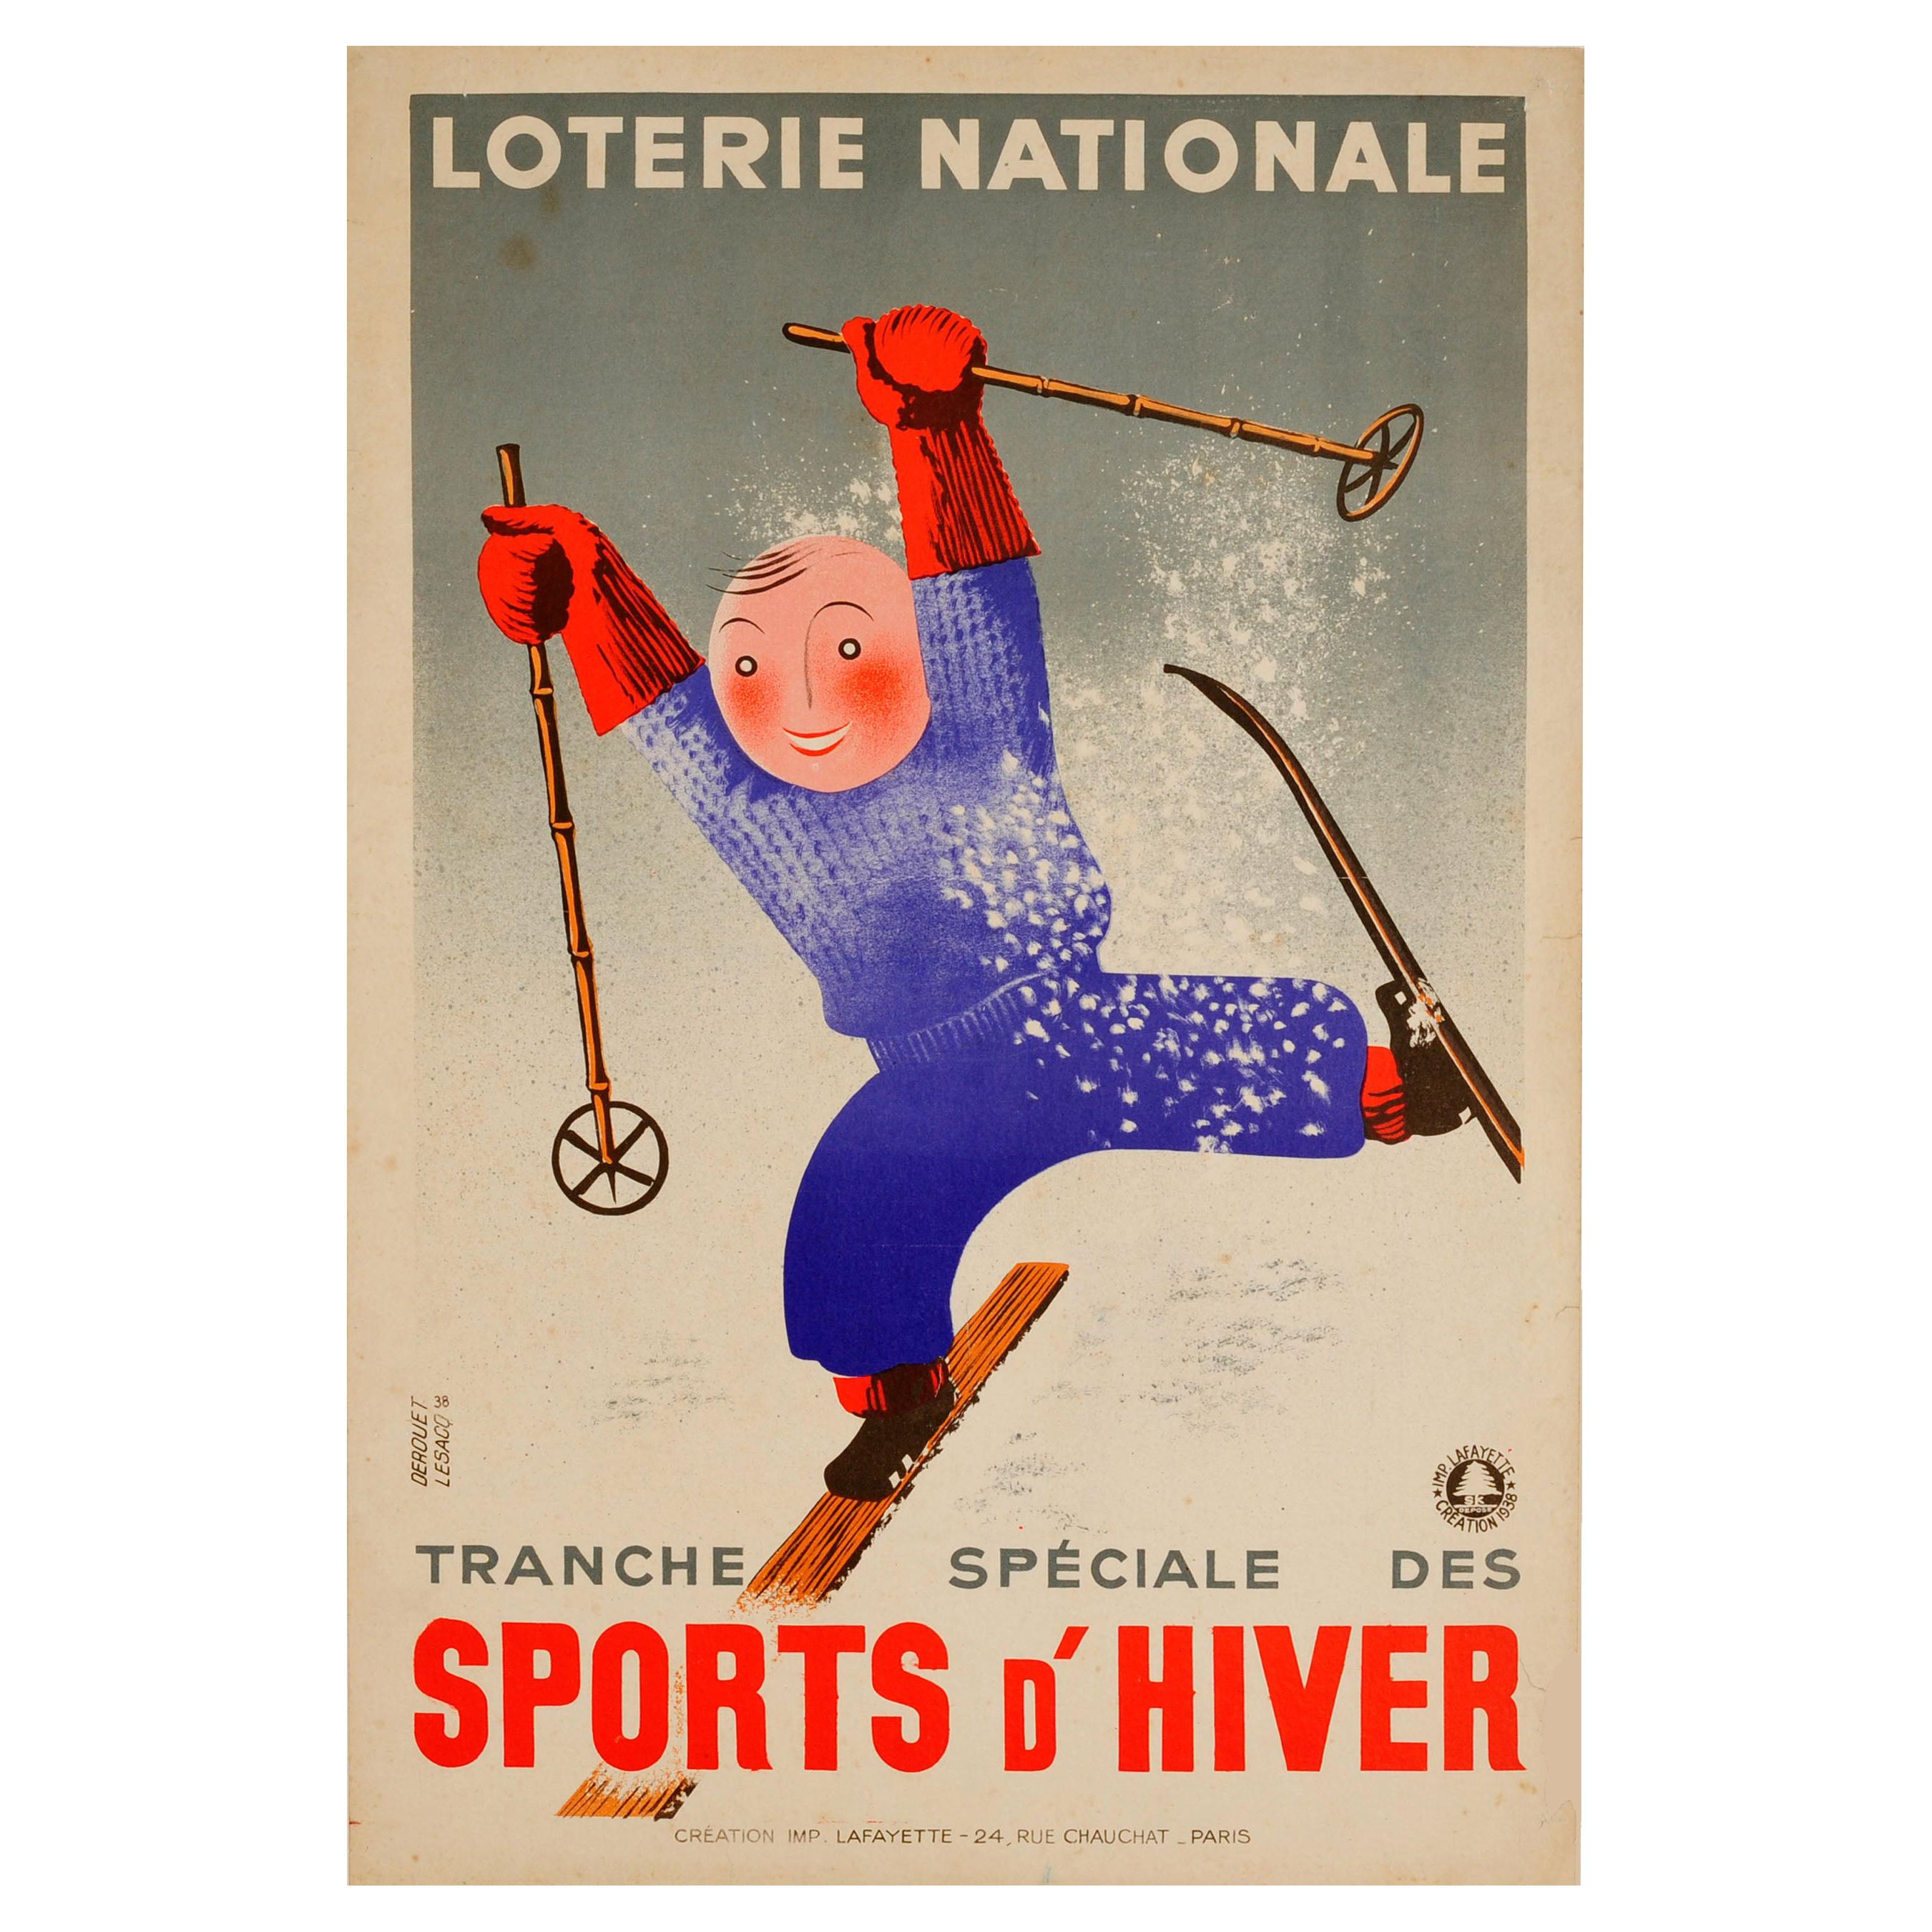 Original Vintage Lottery Poster Loterie Nationale Winter Sports d'Hiver Skiing For Sale